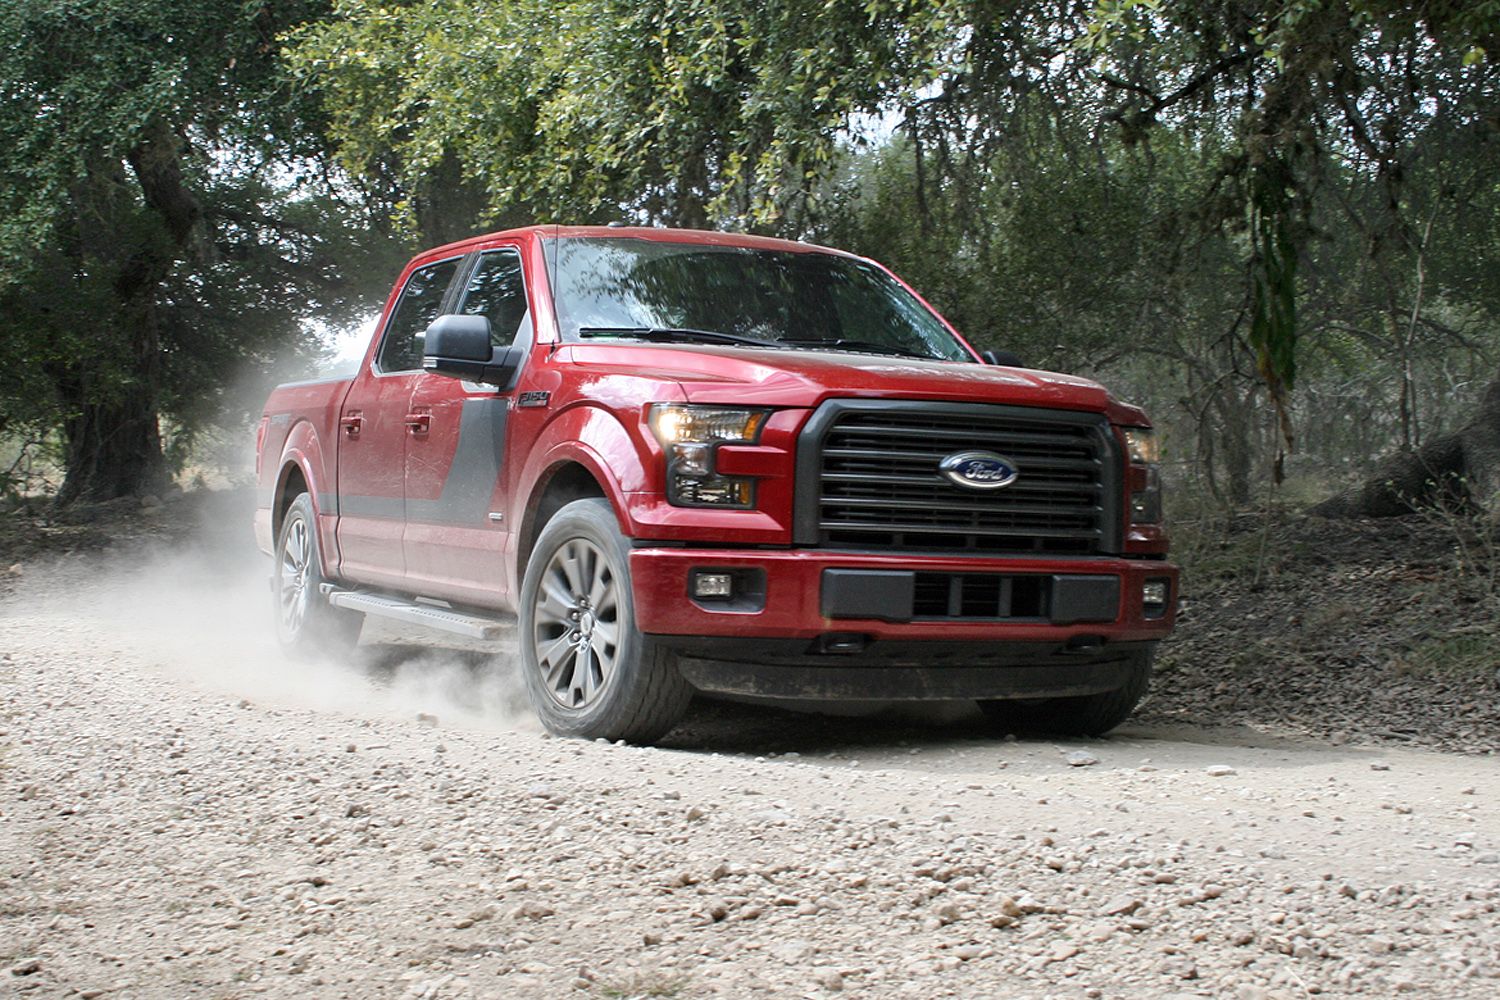 2016 The 2015 Truck of Texas: Crowing the Winners